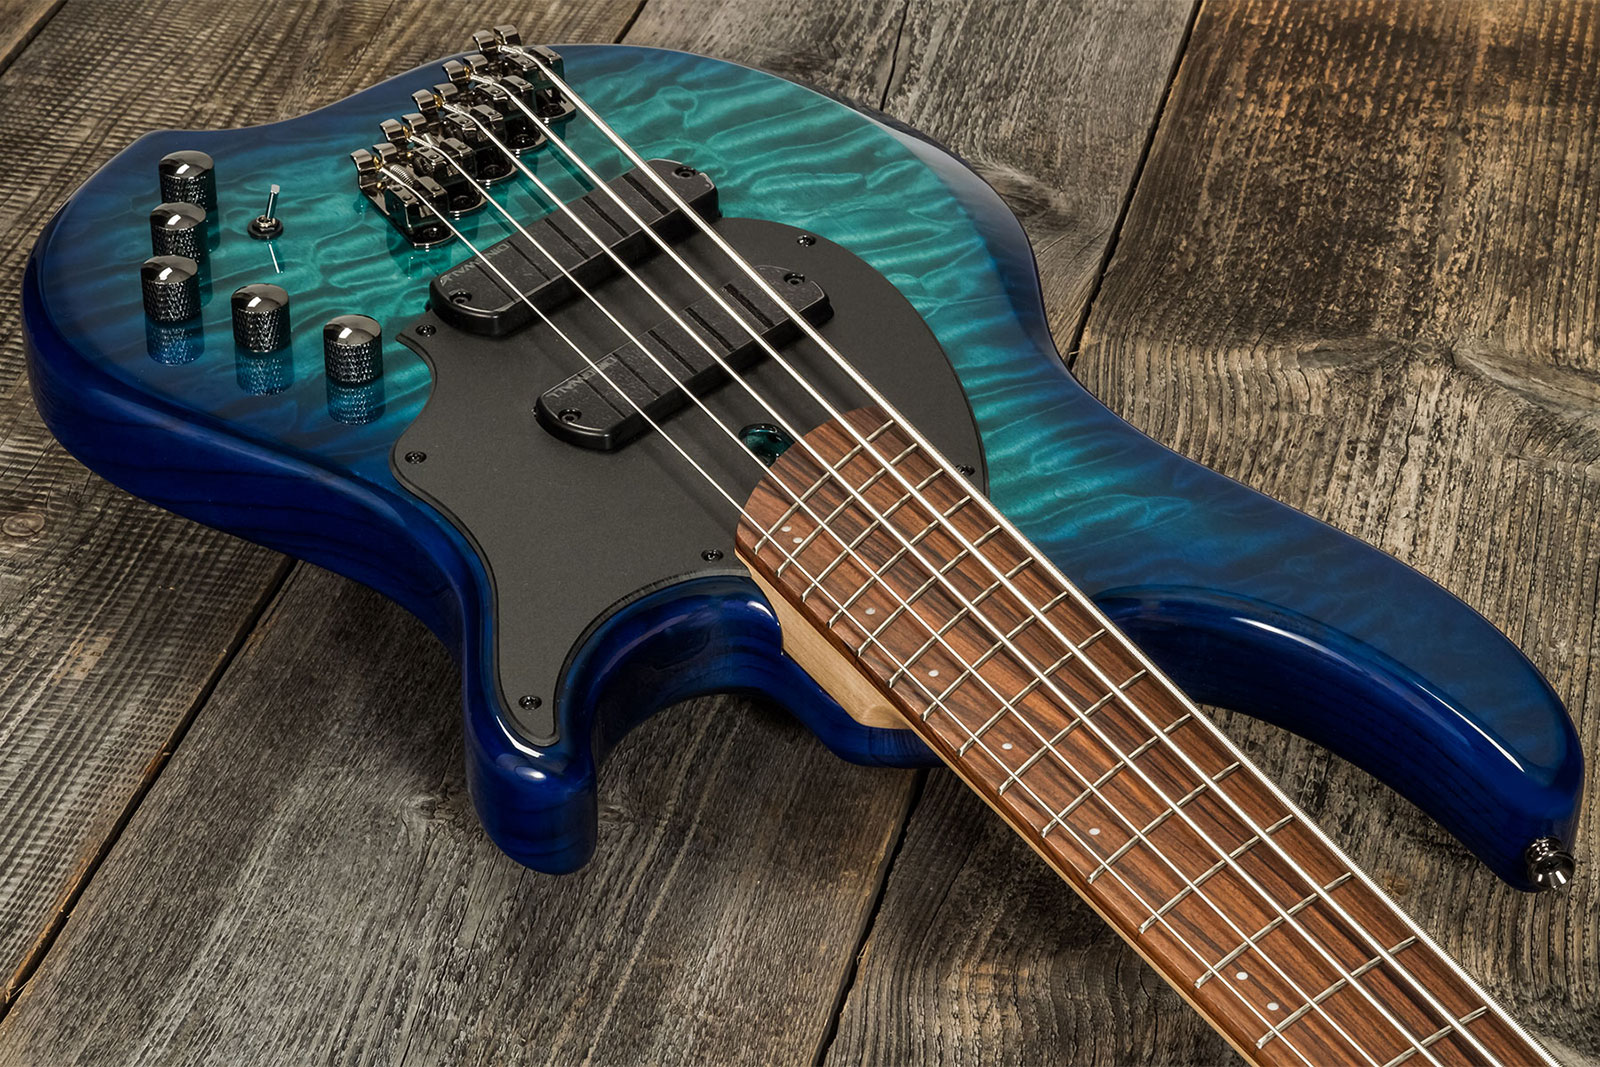 Dingwall Combustion Cb2 5c 2pu Active Pf - Whalepool Burst - Solid body electric bass - Variation 2